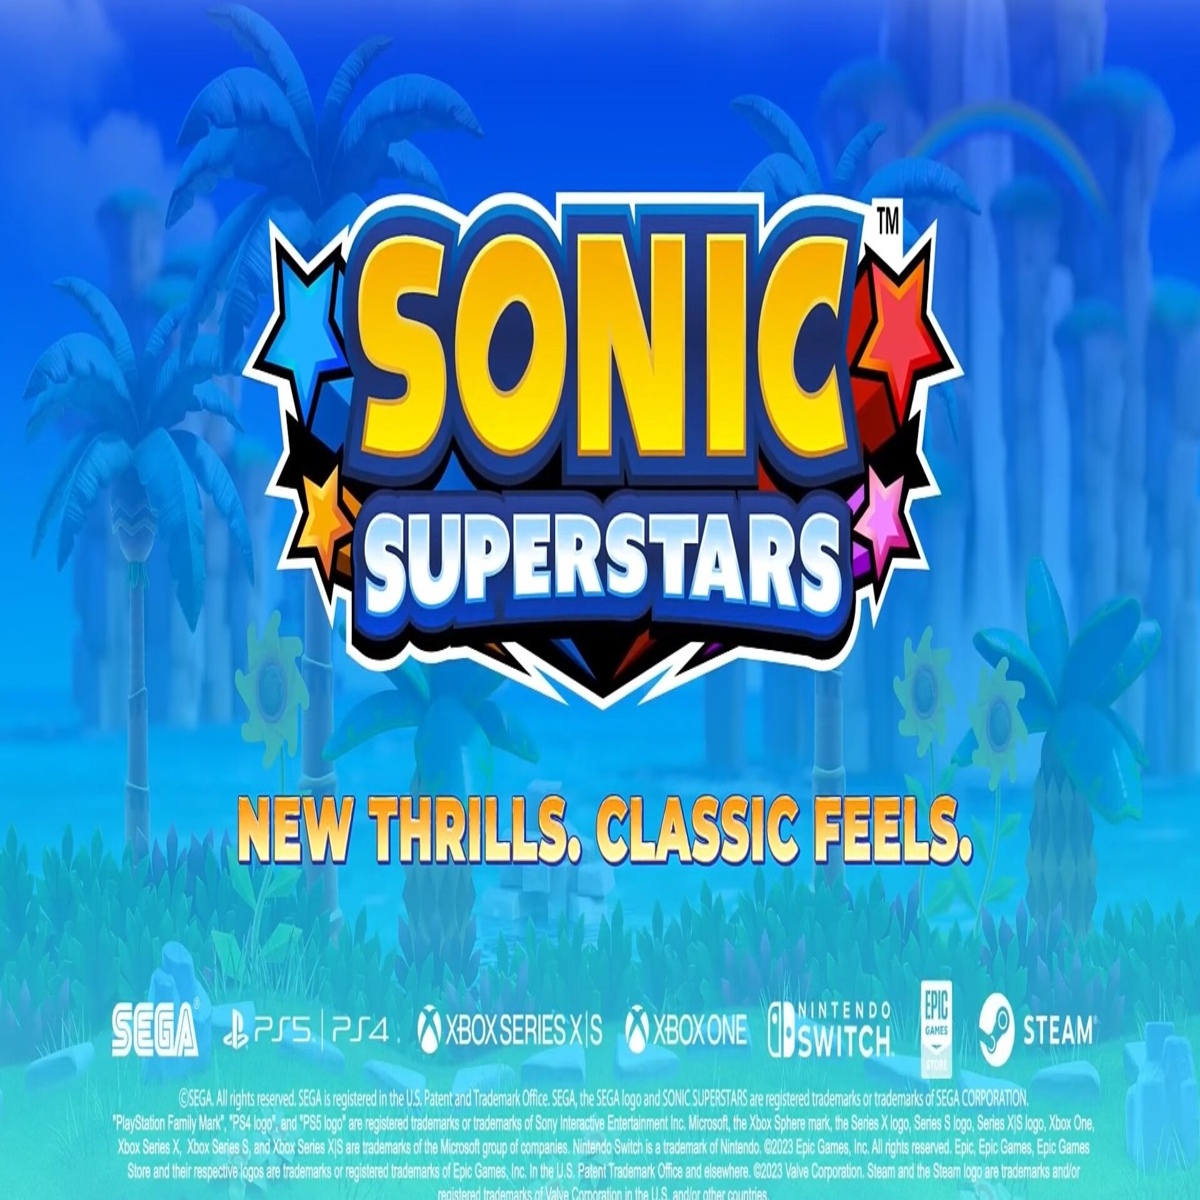 Sonic Superstars is a new thrills adventure feels VG247 classic | 2D that new and promises